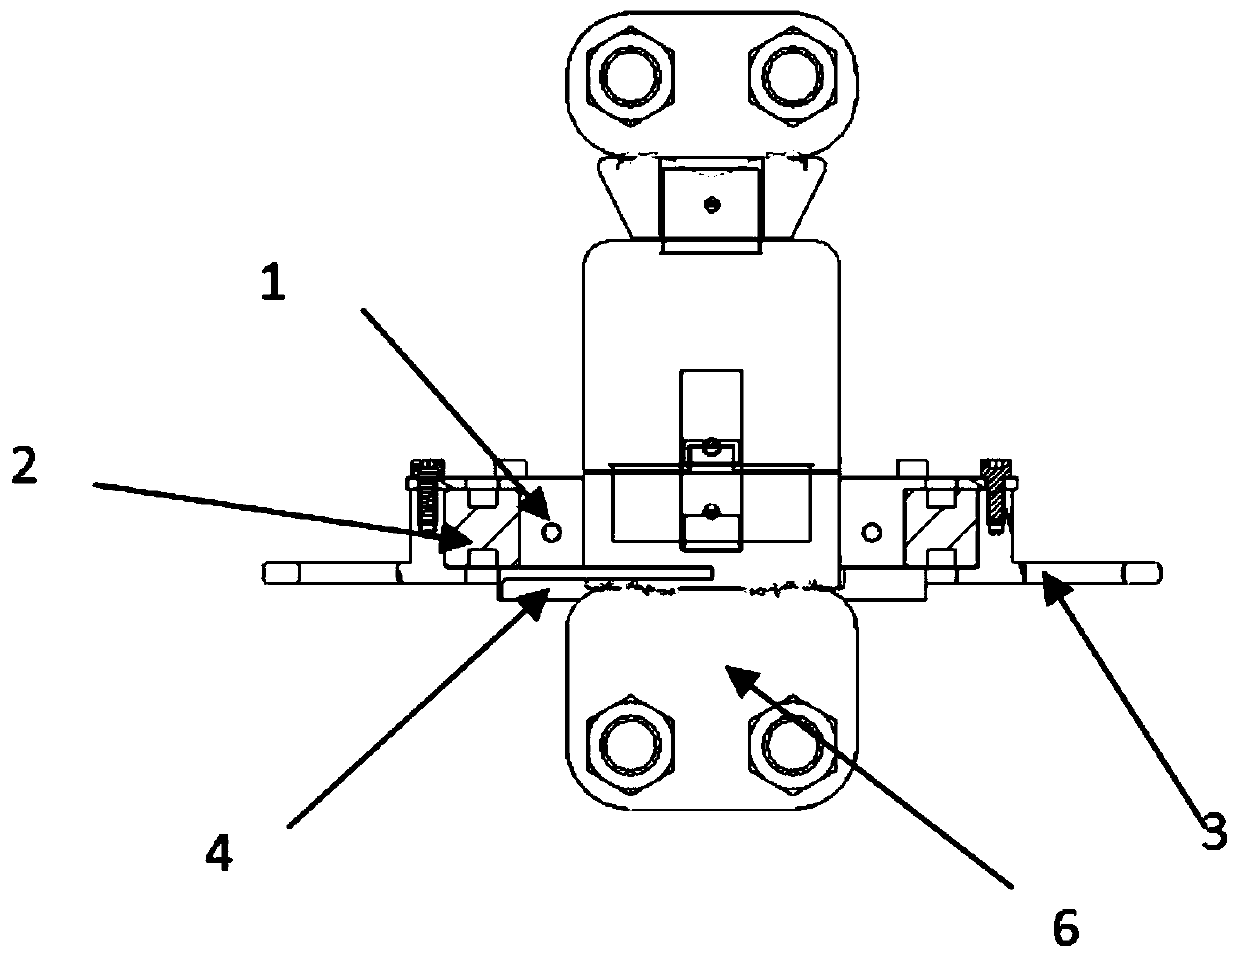 An air-drop derotation device and a parachute removal device with a derotation function